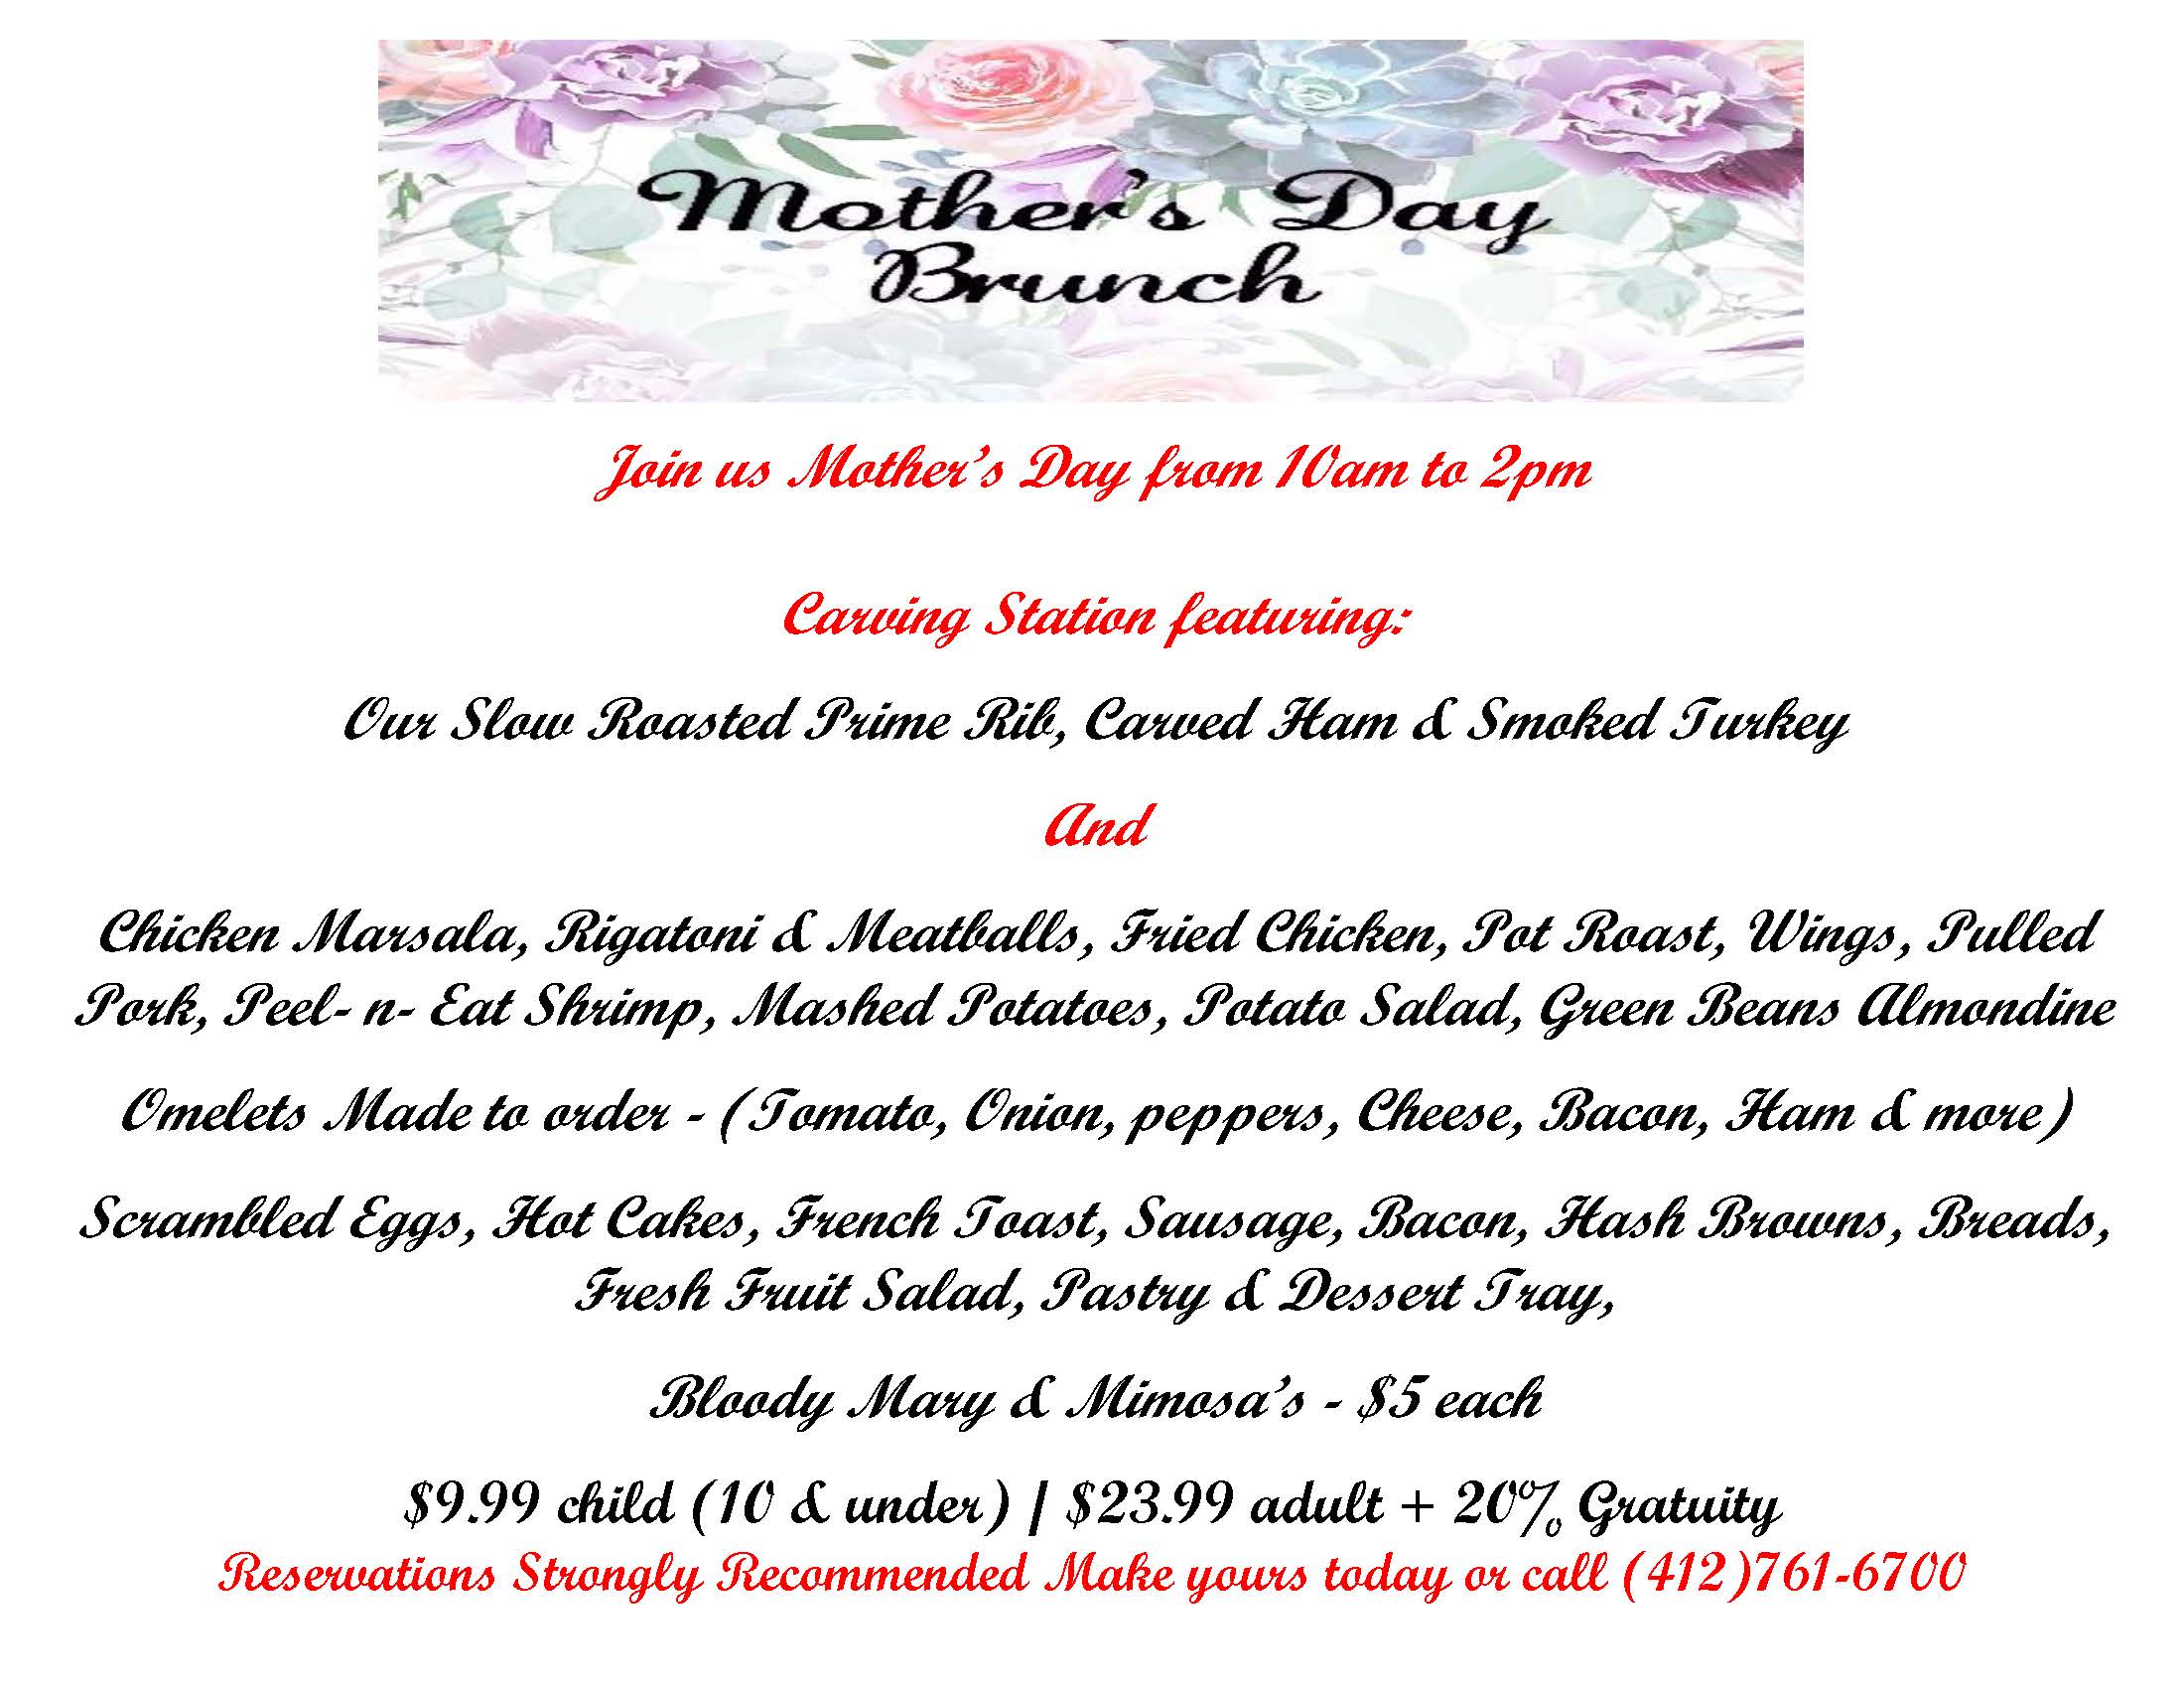 This is a real pain.  this is a picture of our mothers day menu. It has nothing to do with this .